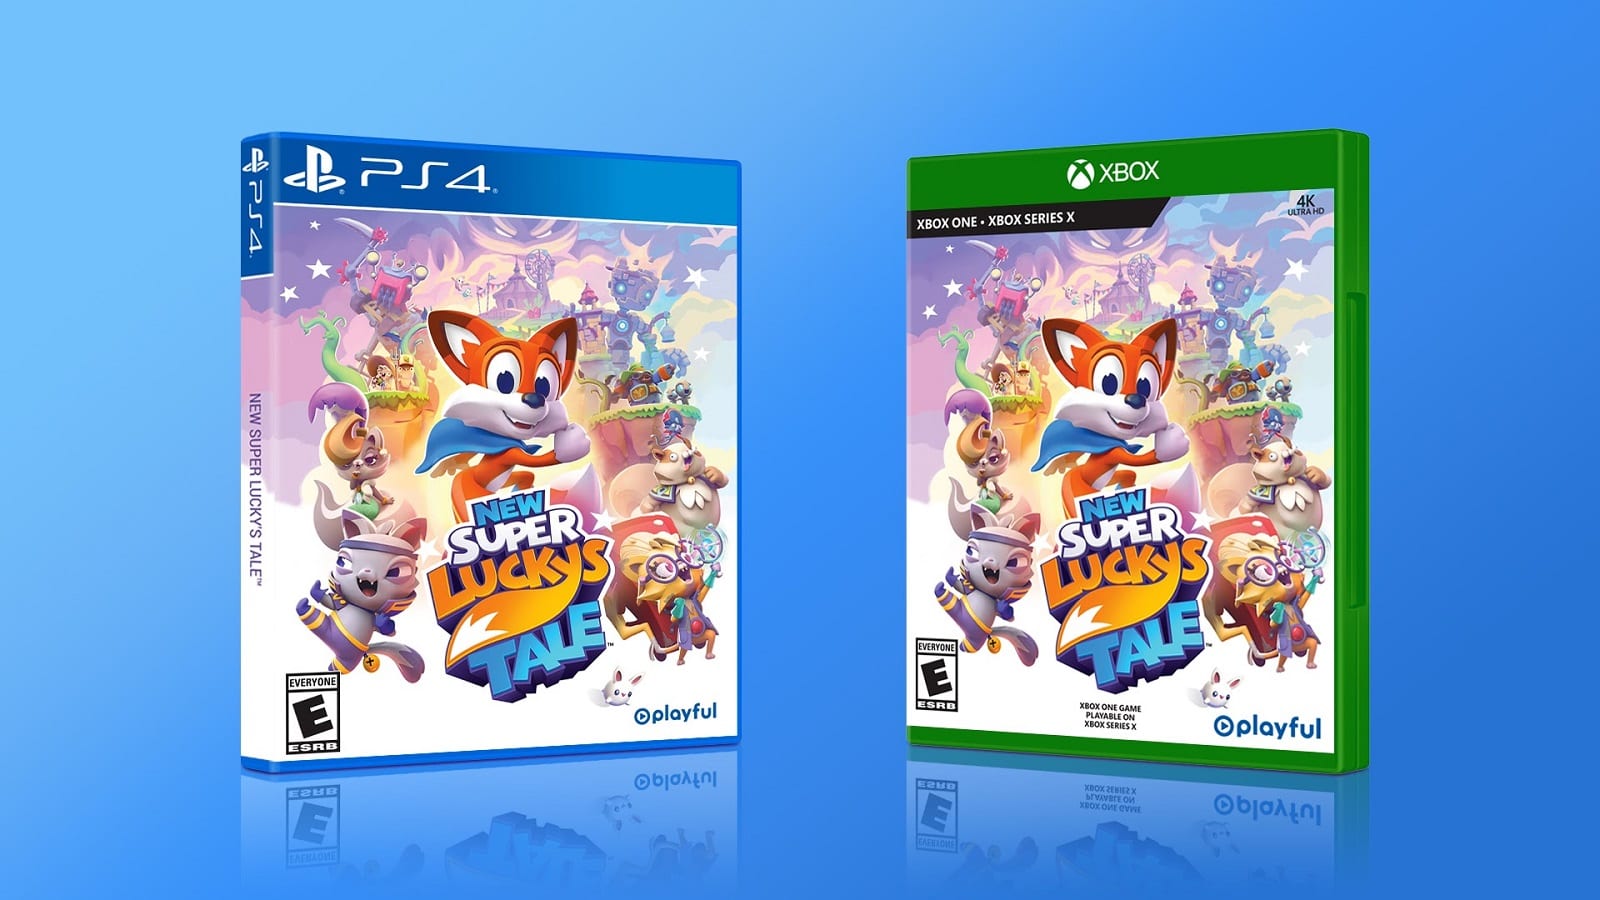 Lucky S Tale Franchise Surpasses 3 Million Users Ps4 And Xbox One New Super Lucky S Tale Physical Releases Available Now Gaming Trend